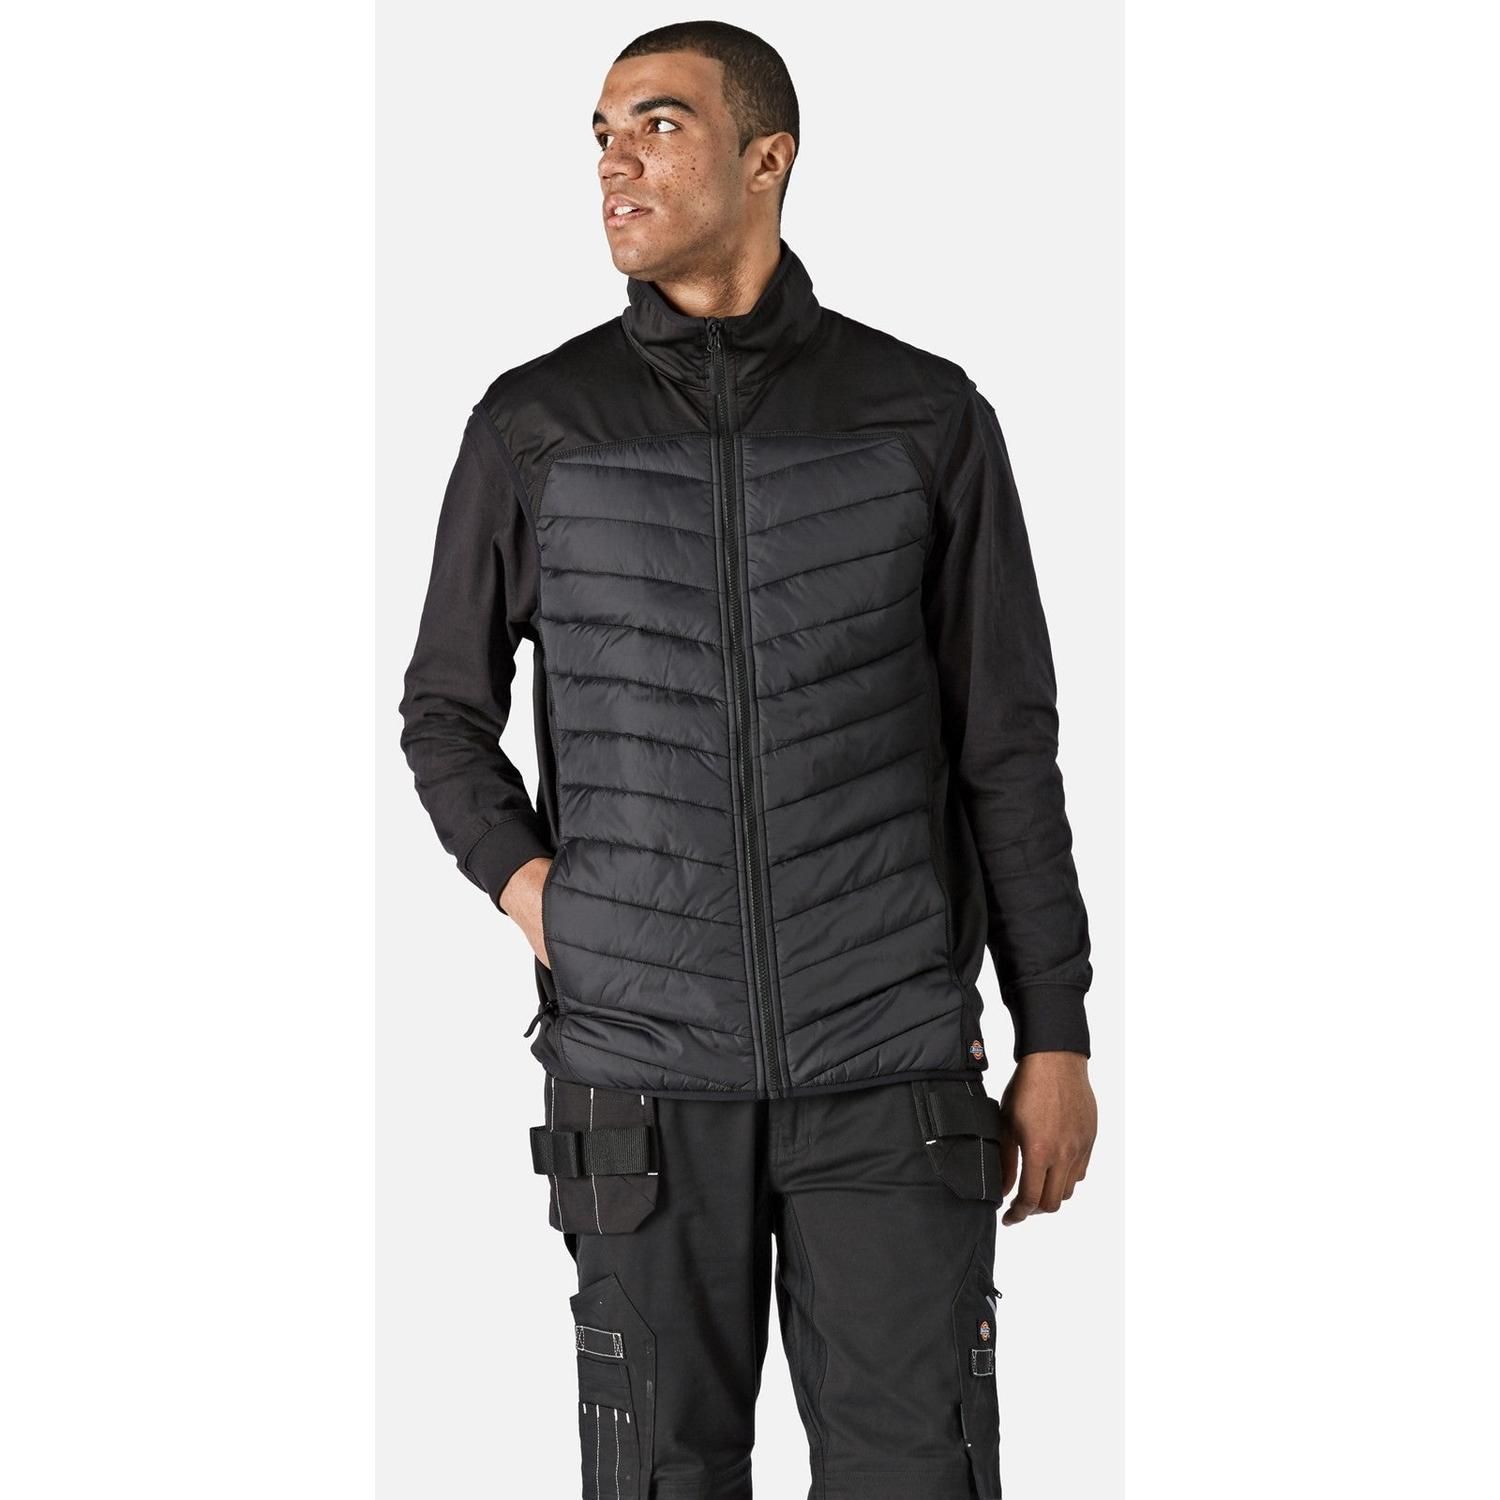 Stay warm and comfortable in all weathers with this durable, versatile Bodywarmer. With reflective finishes and padded panels, this design will keep you cosy and give you the freedom to move.